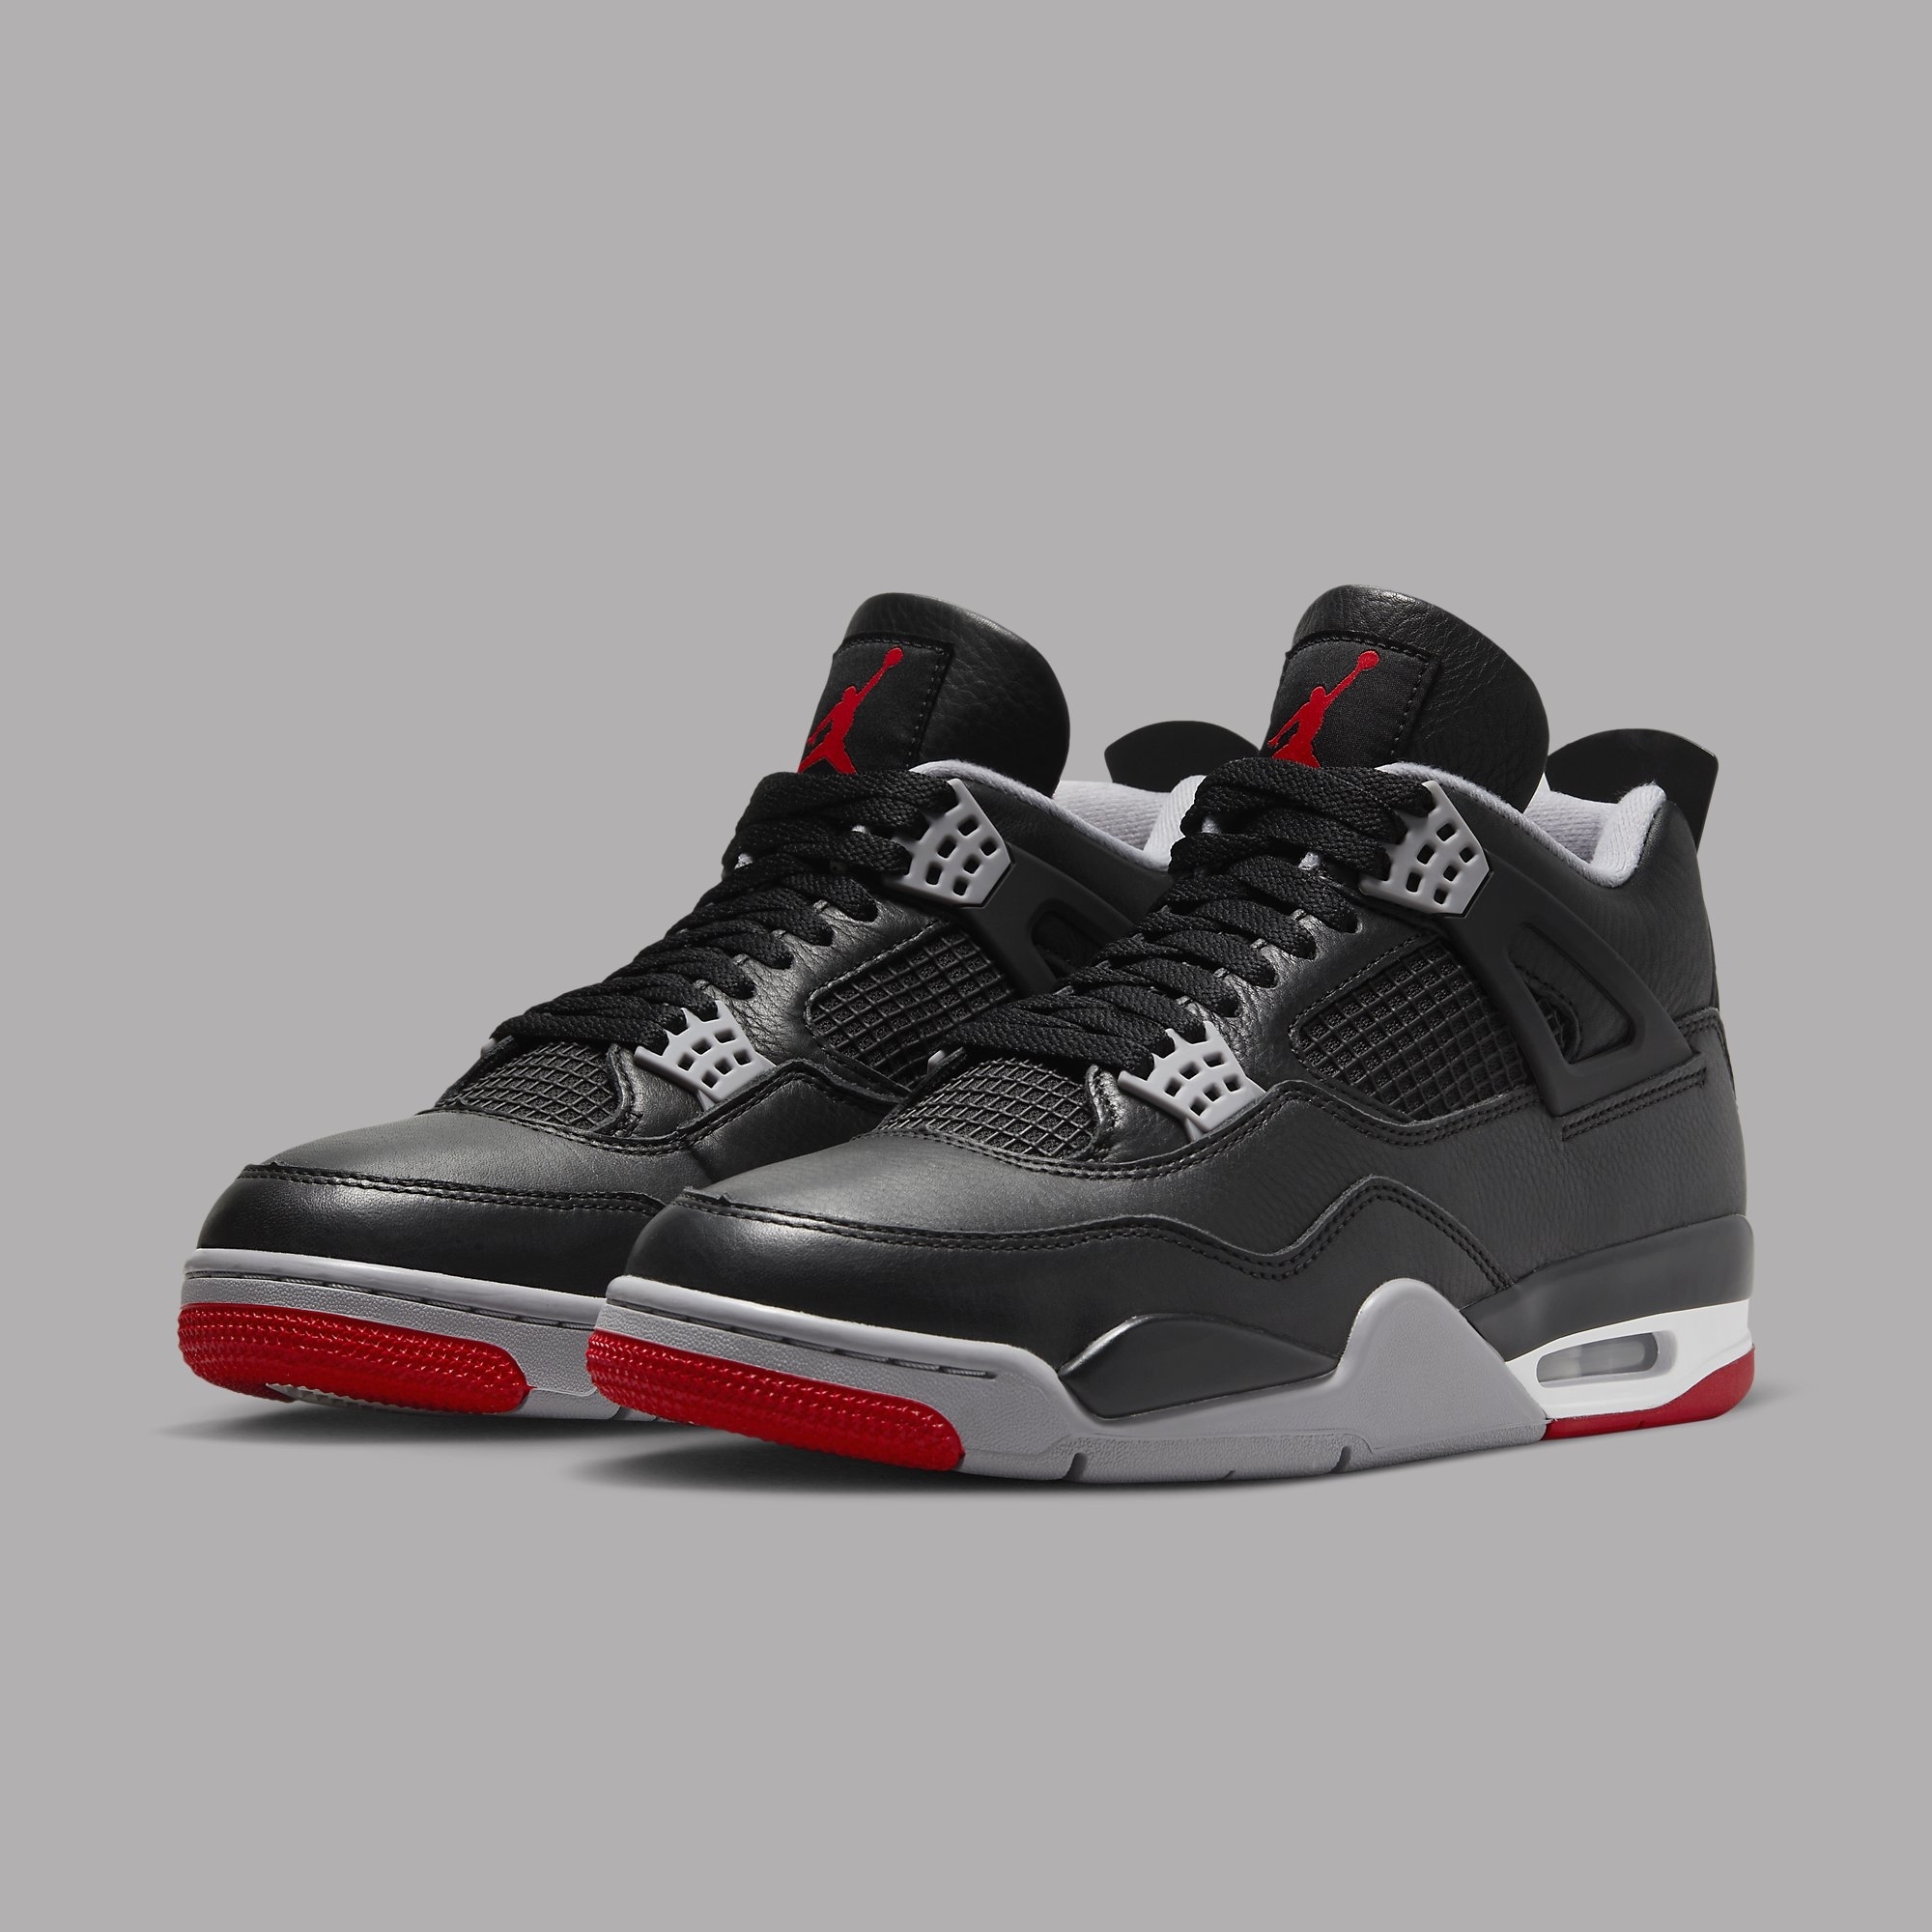 Air Jordan 4 'Bred Reimagined' FV5029-006 Release Date: How to Buy